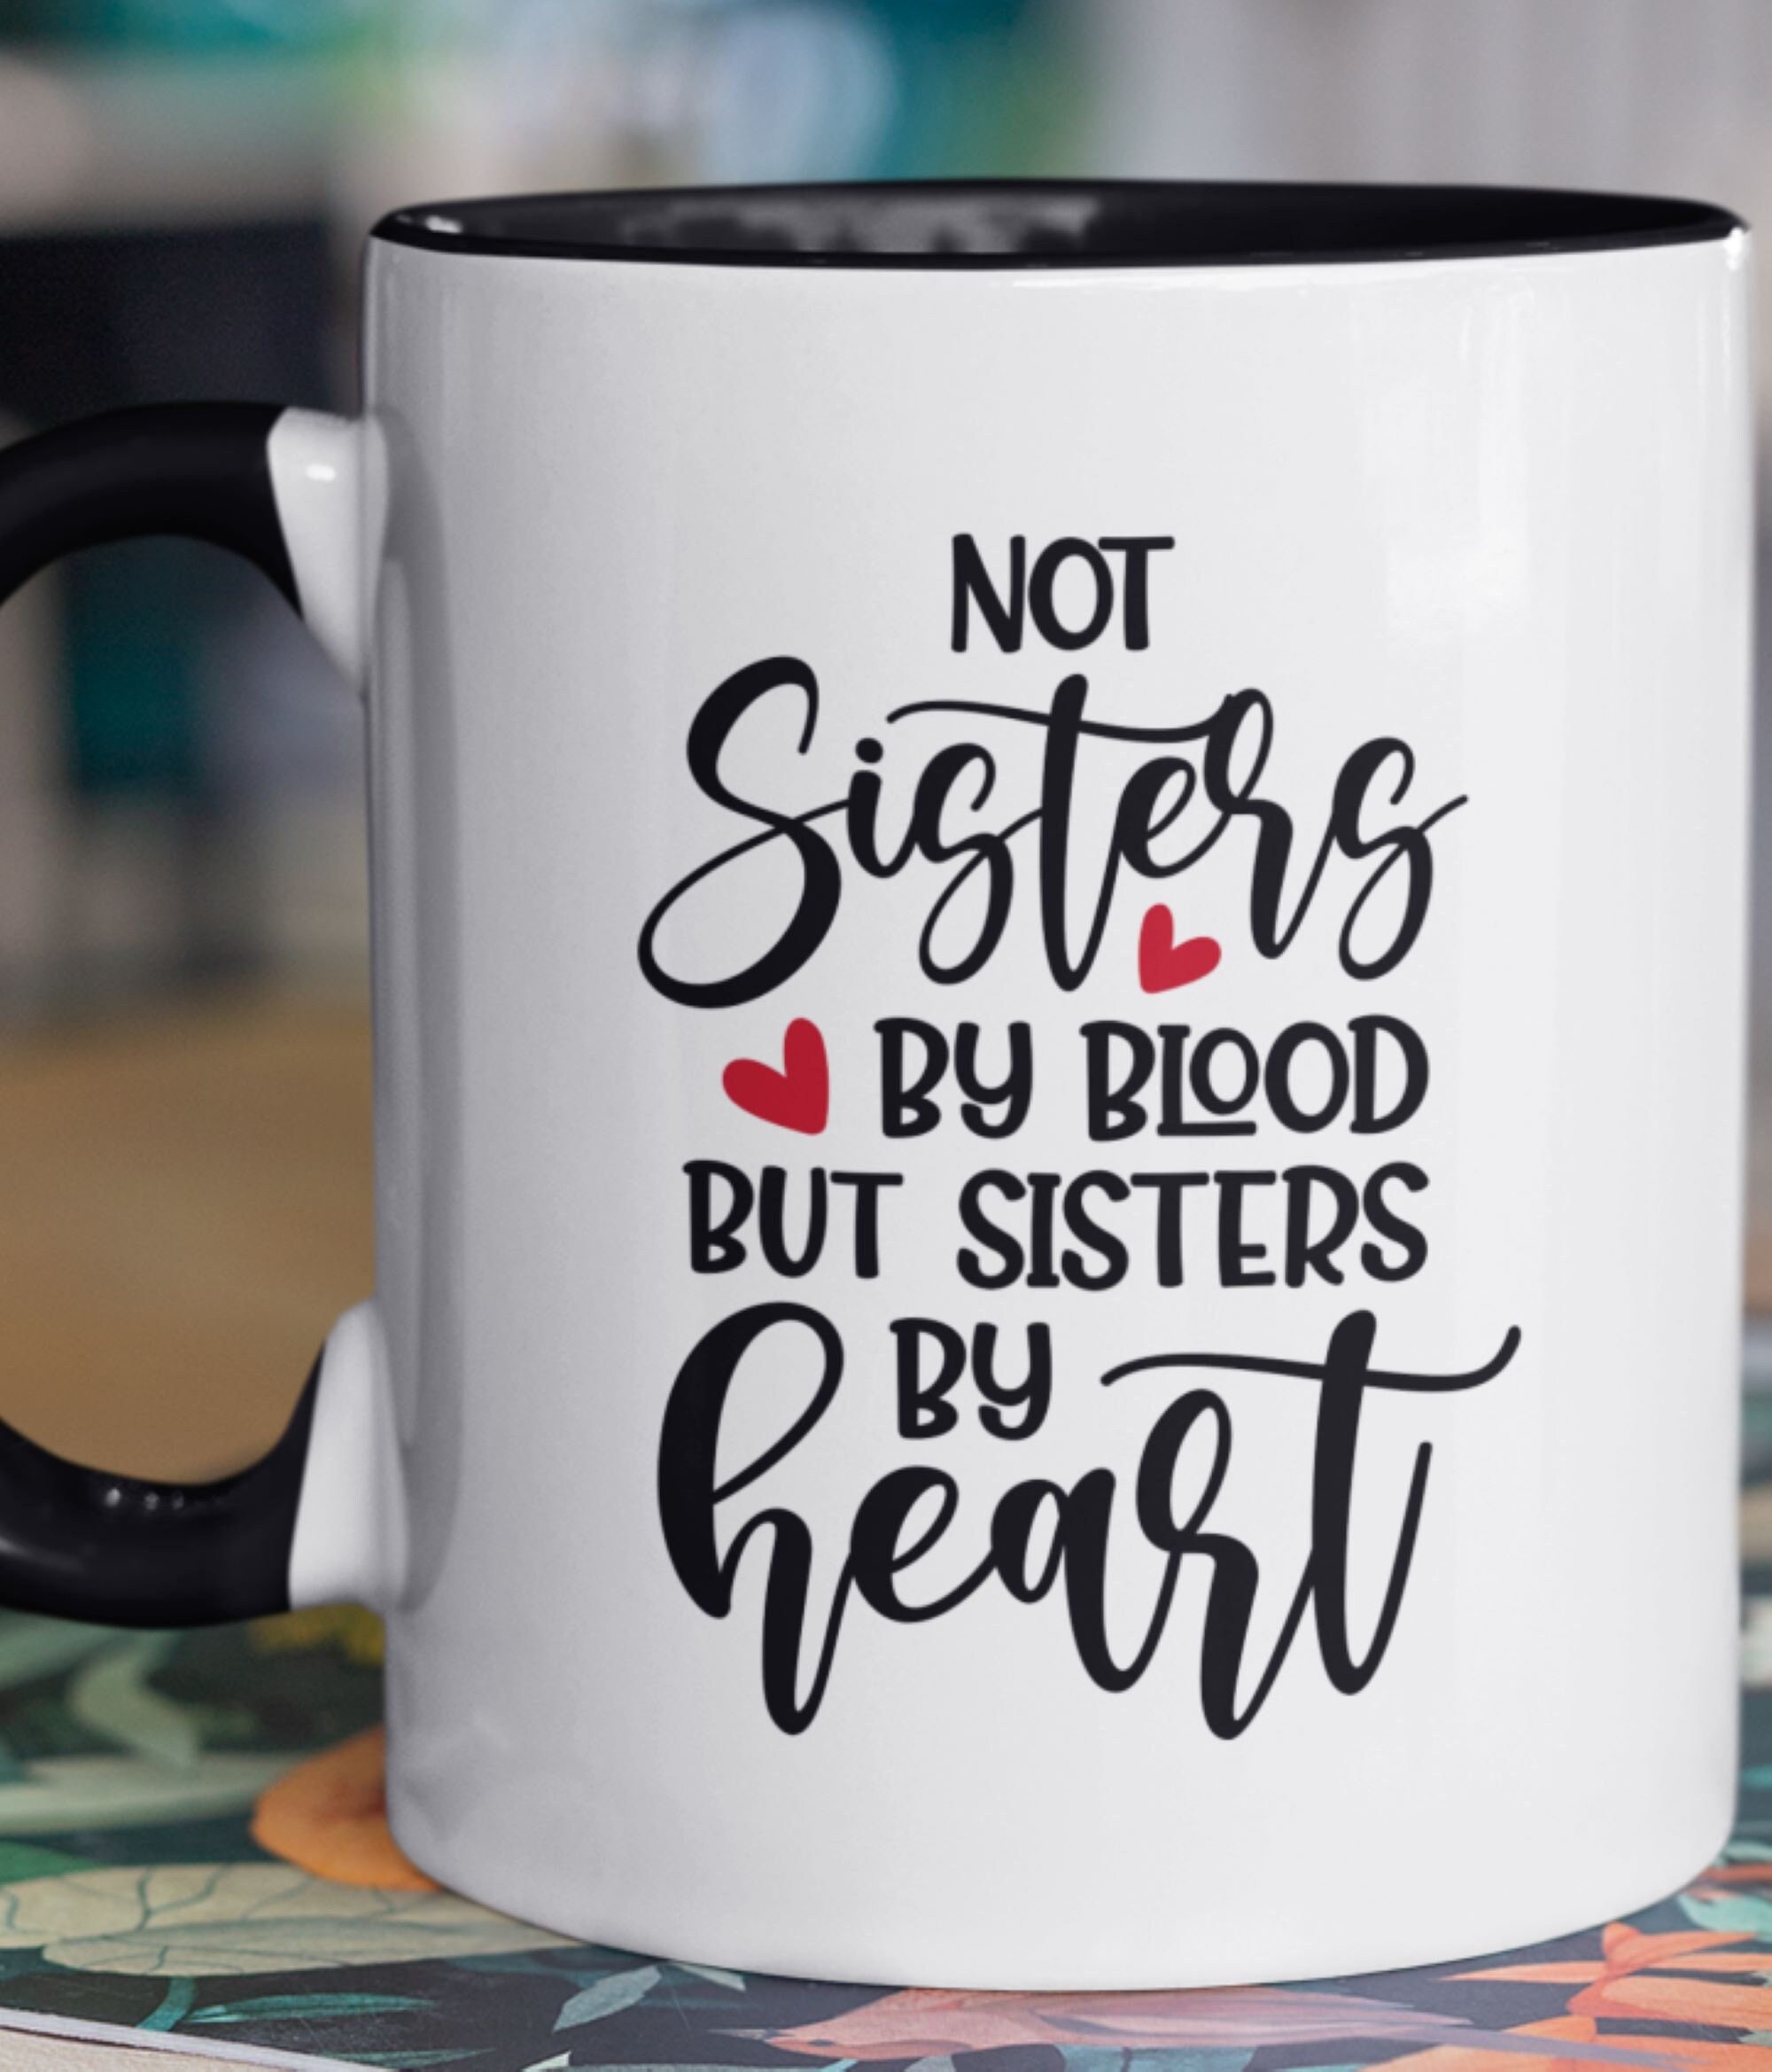 Sister Gifts, Personalized Gifts, Sisters Are Different Flowers